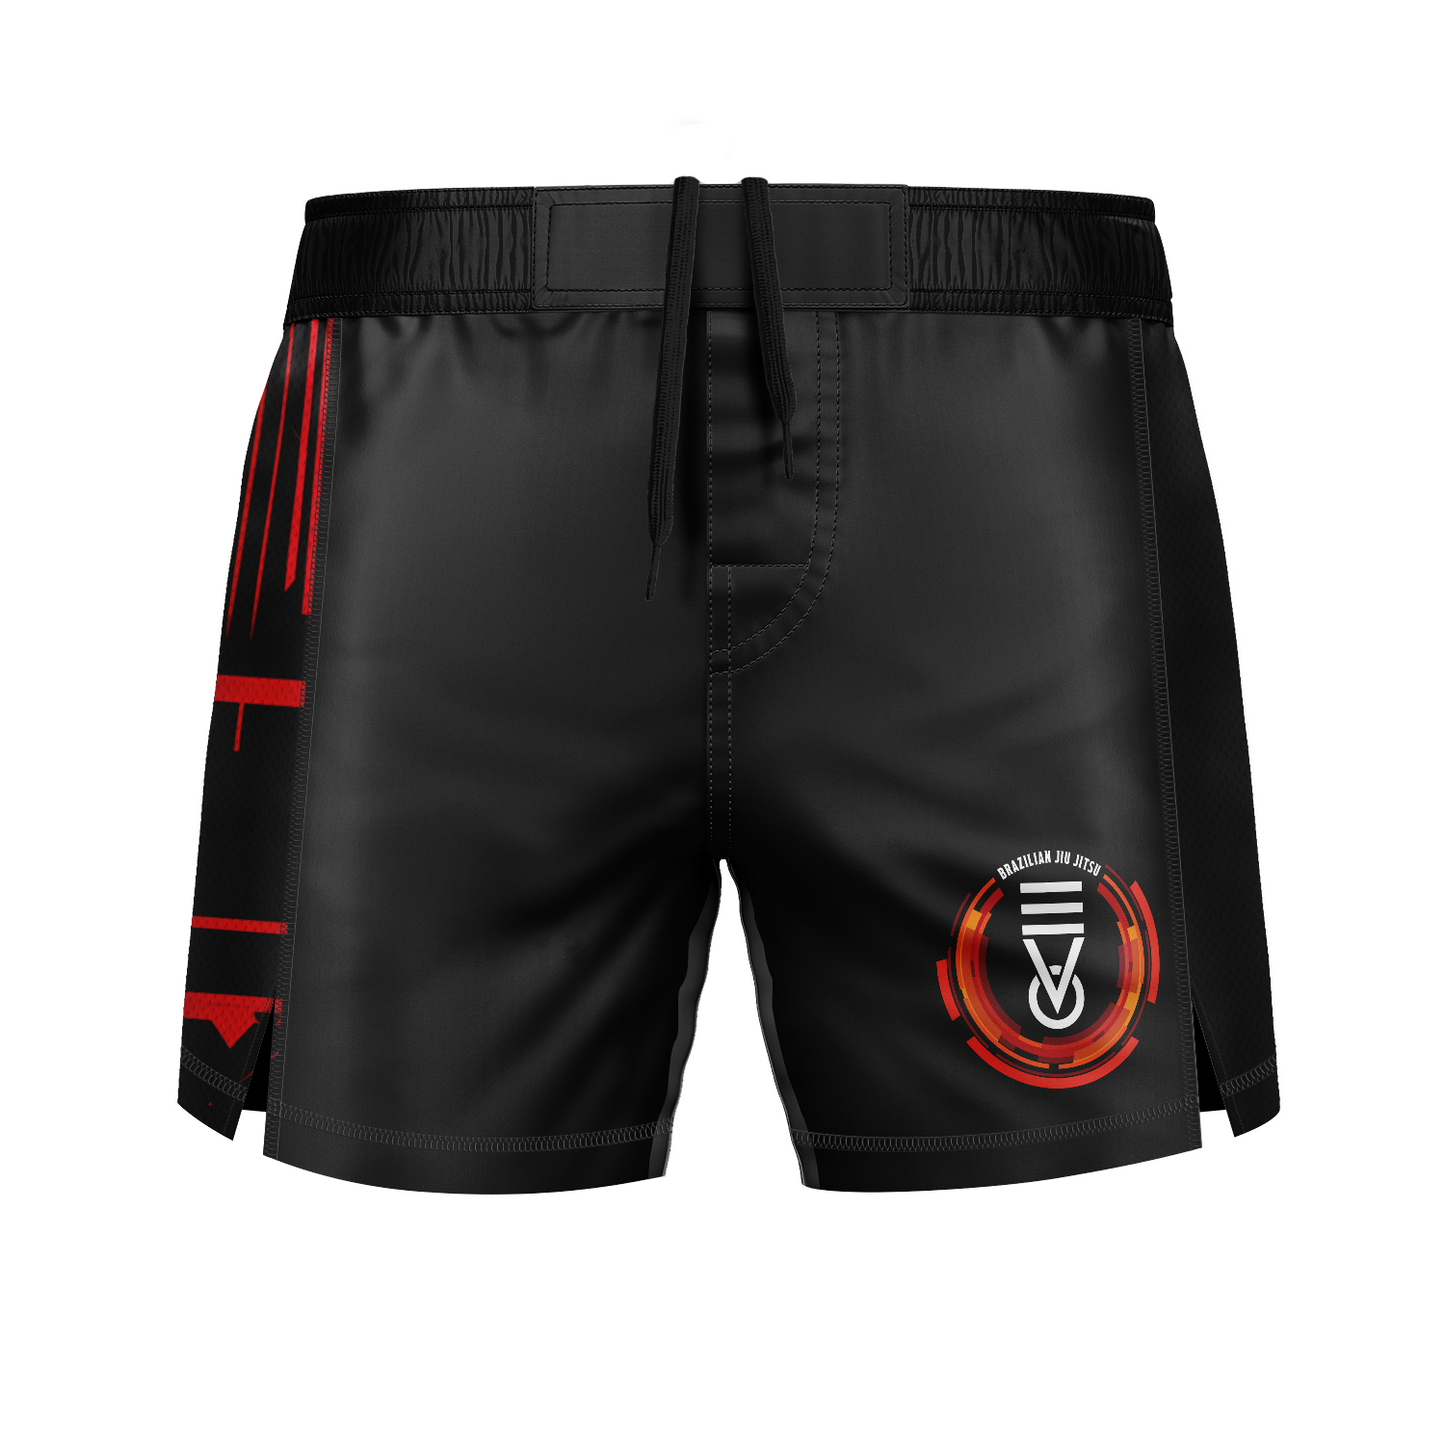 Evo BJJ fight shorts Ranked, black and red